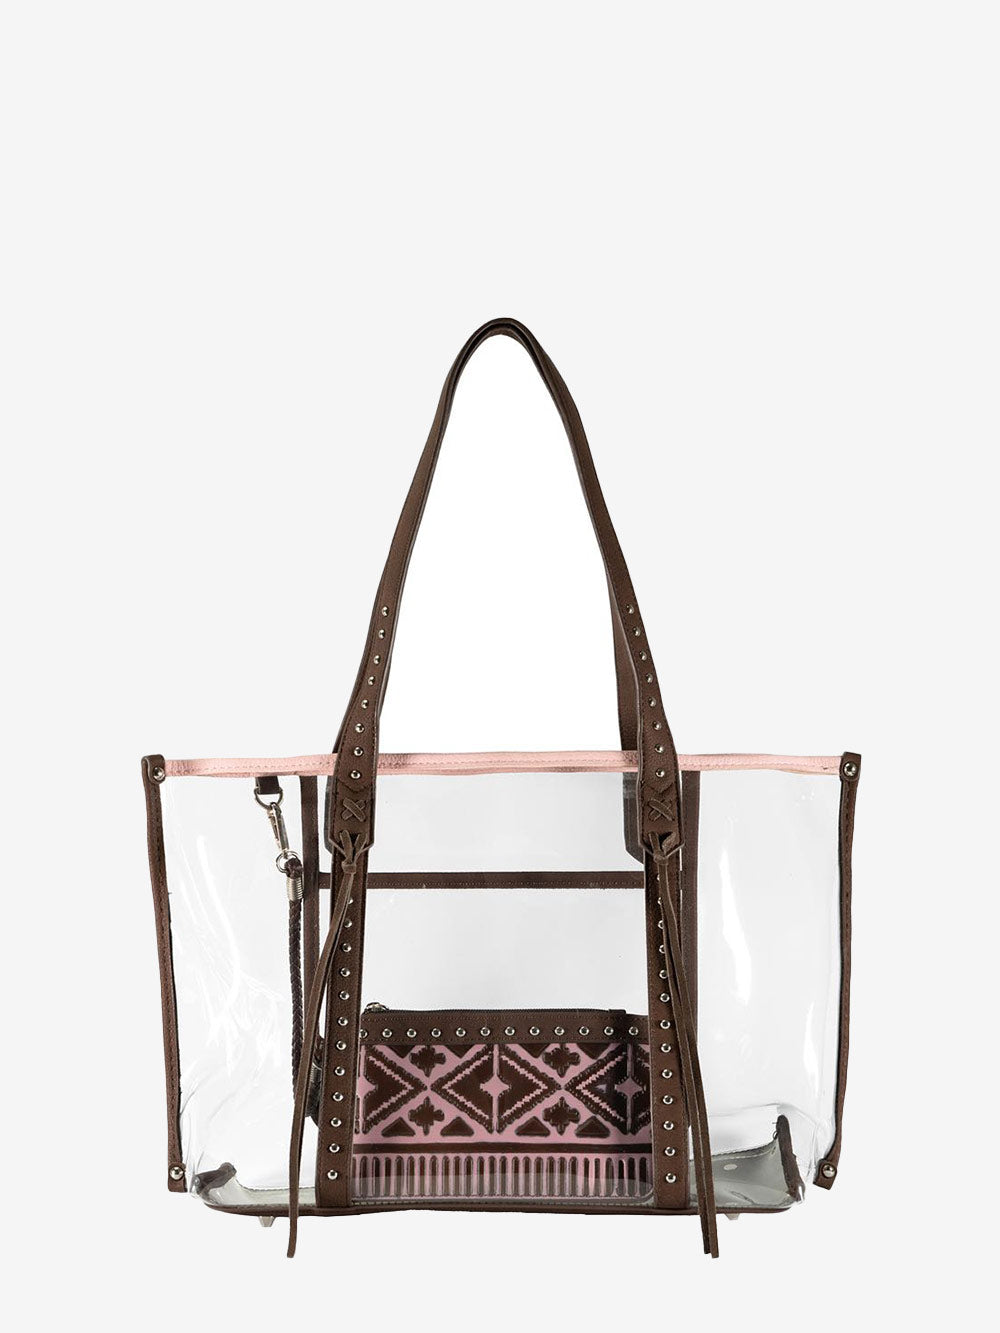 Montana West Aztec PVC Embossed Clear Tote Bag - Montana West World